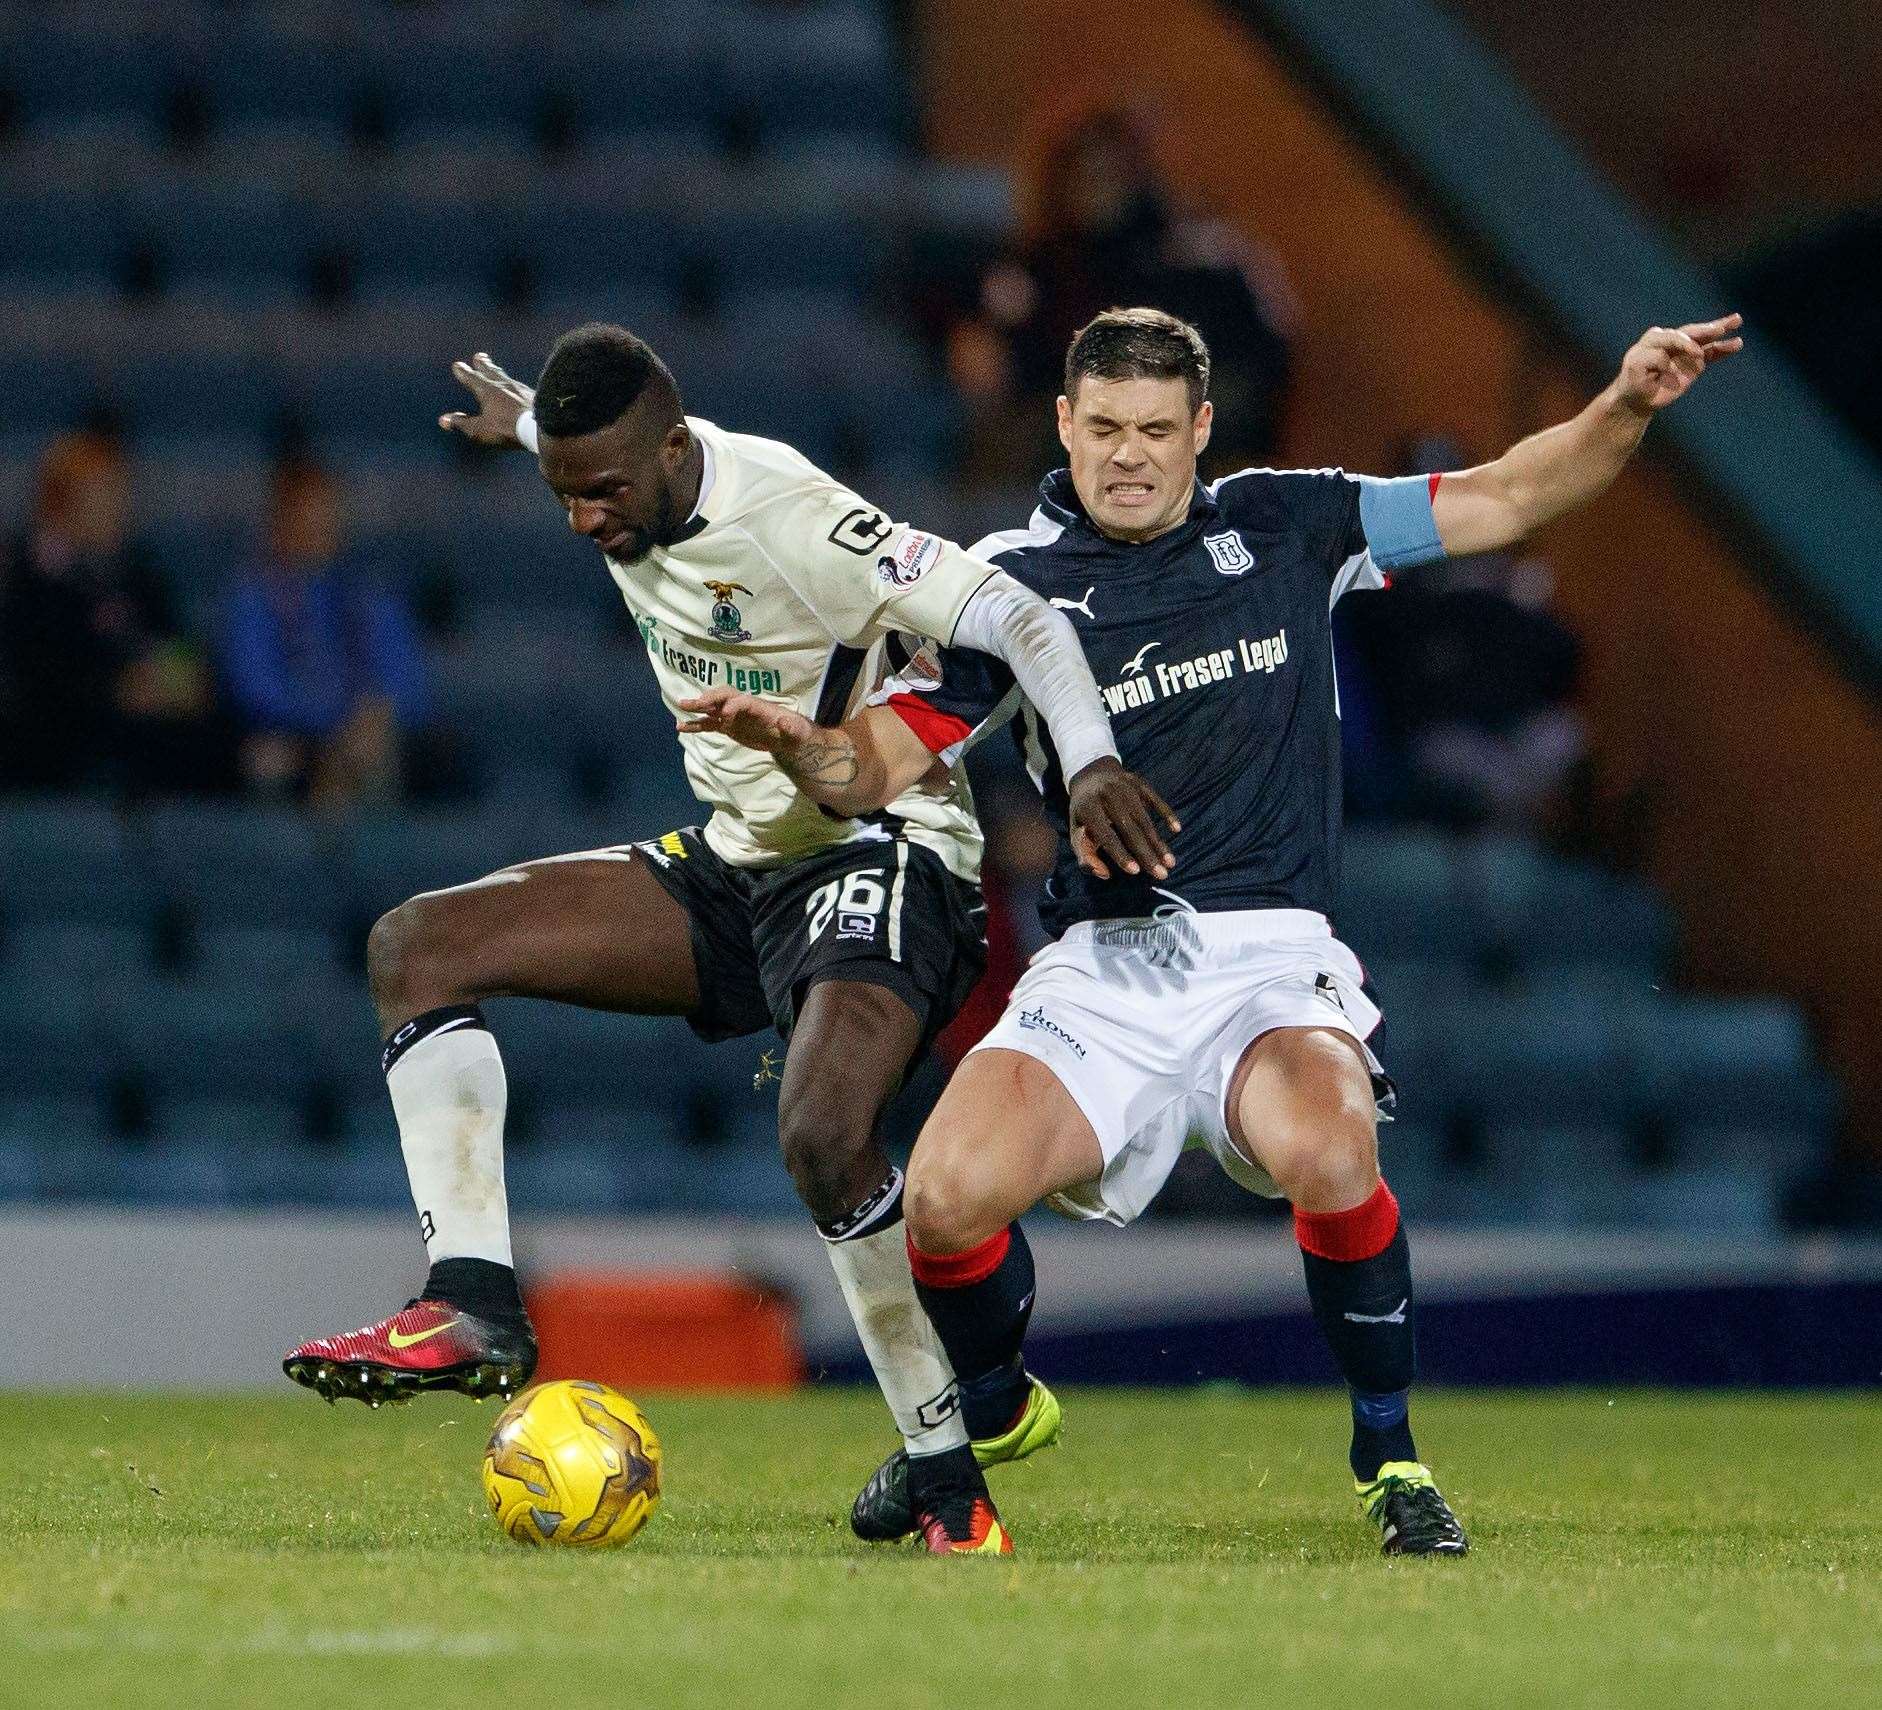 Darren O'Dea (right) pictured playing for Dundee and tackling Lonsana Doumbouya in a match in 2016.